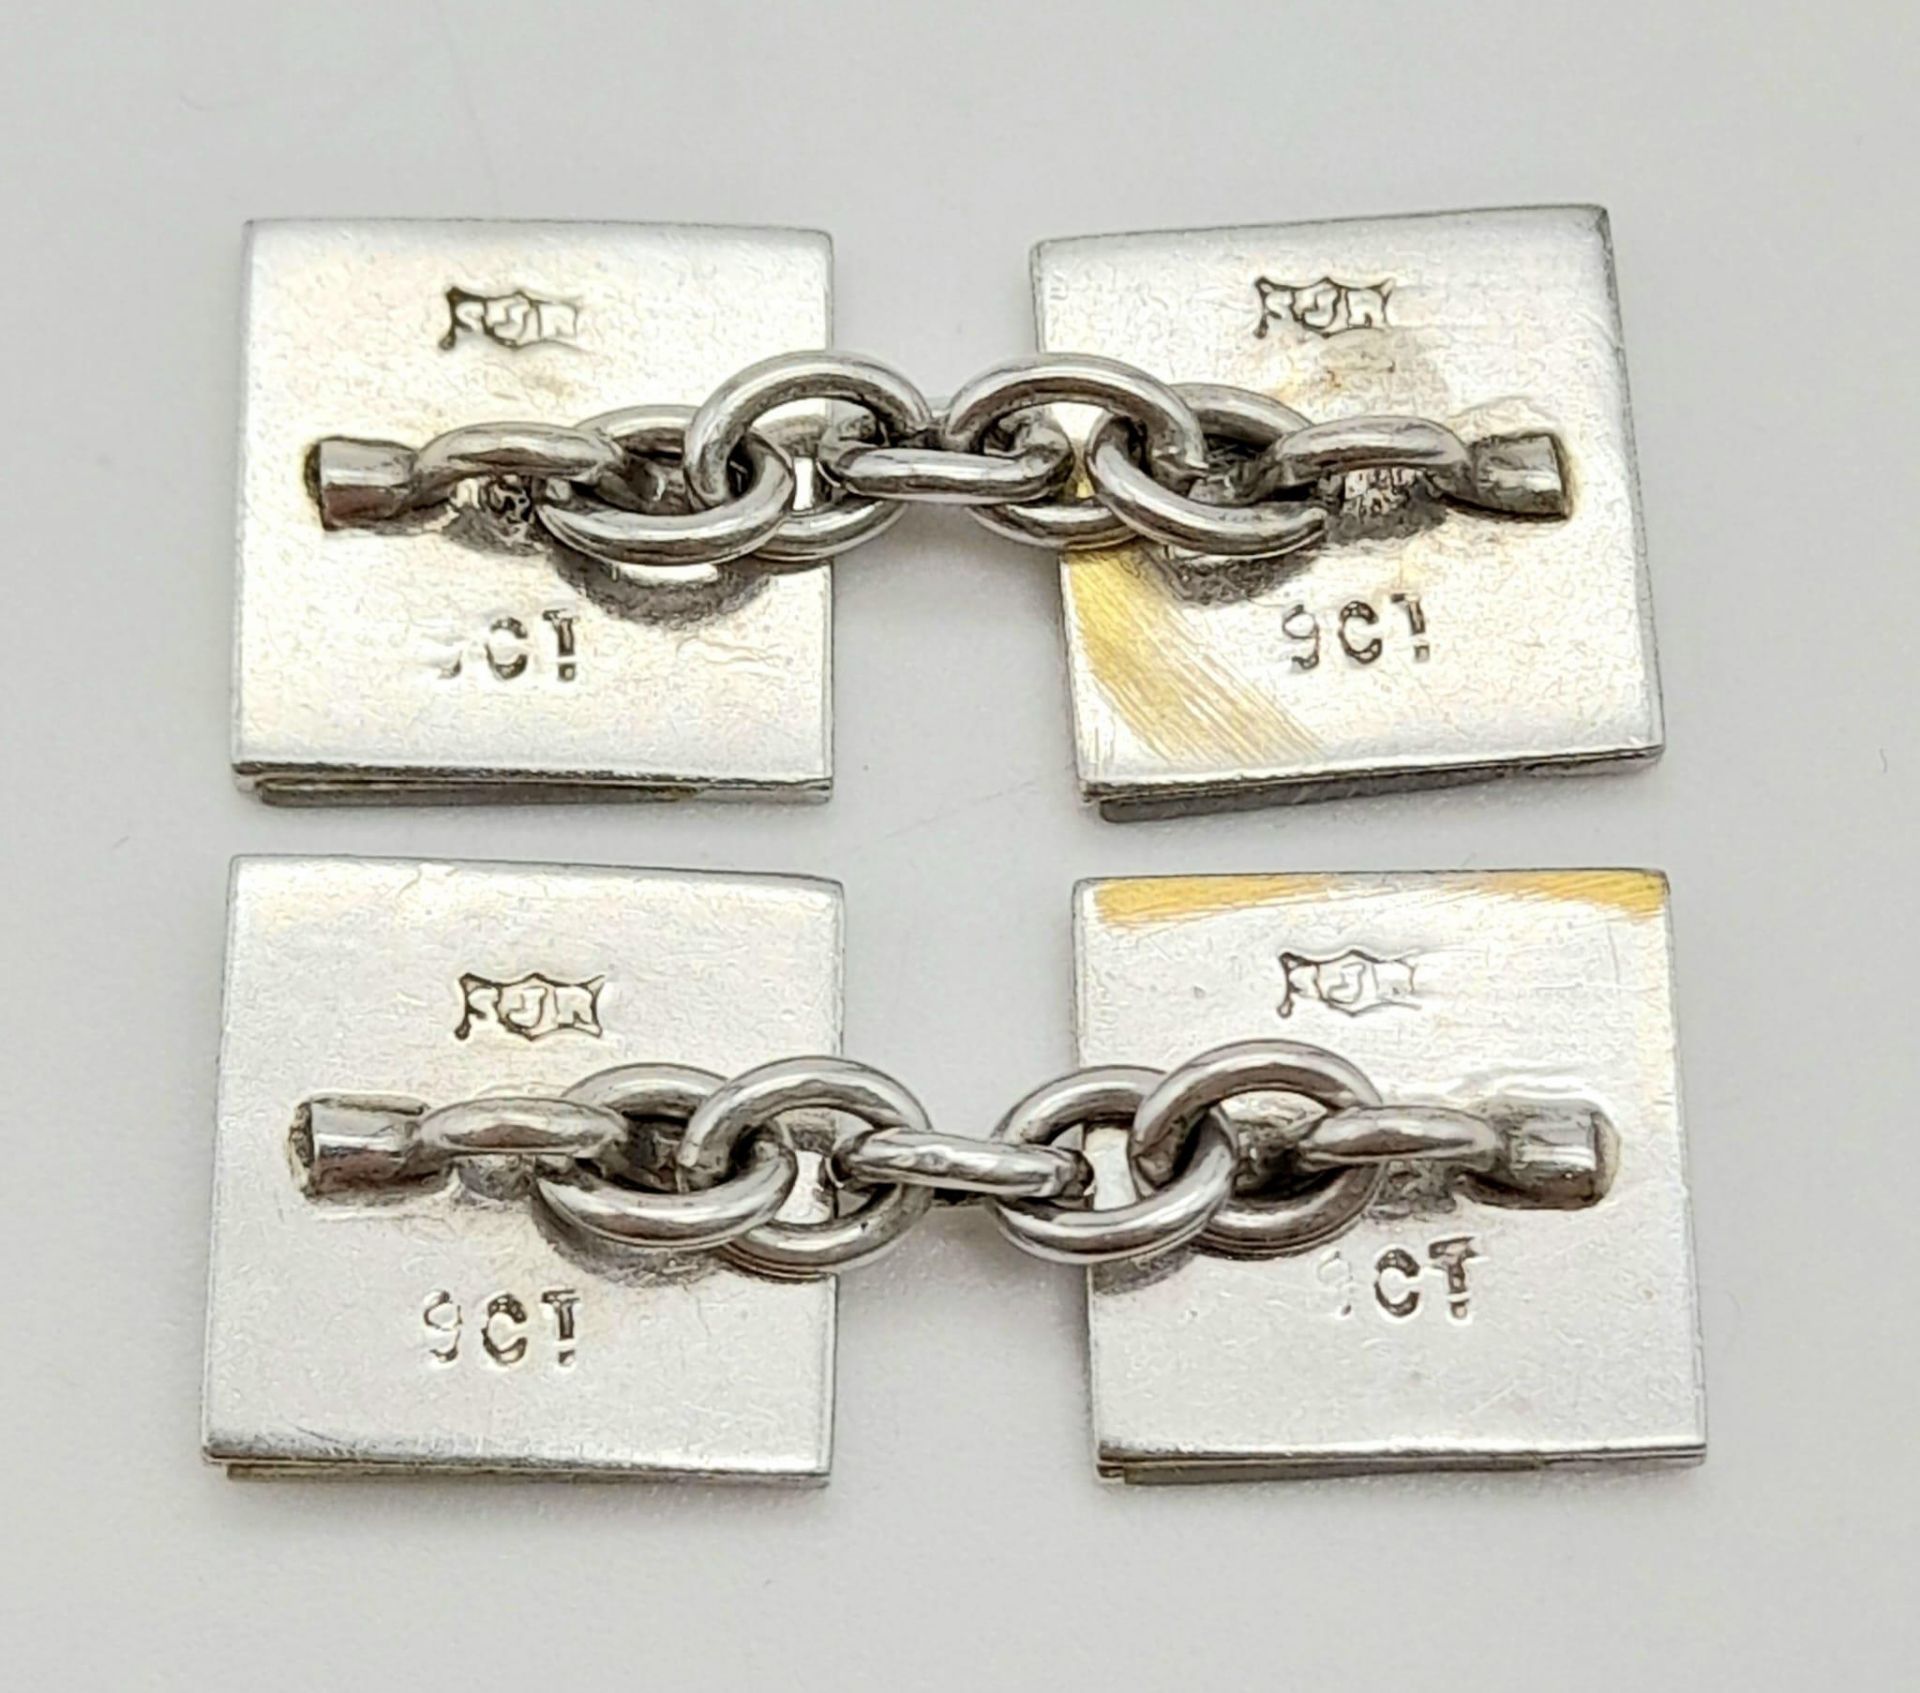 Pair of 9k white gold cufflinks, mother of pearl decorated square faces, weight 5.7g ref 13229 - Image 3 of 4